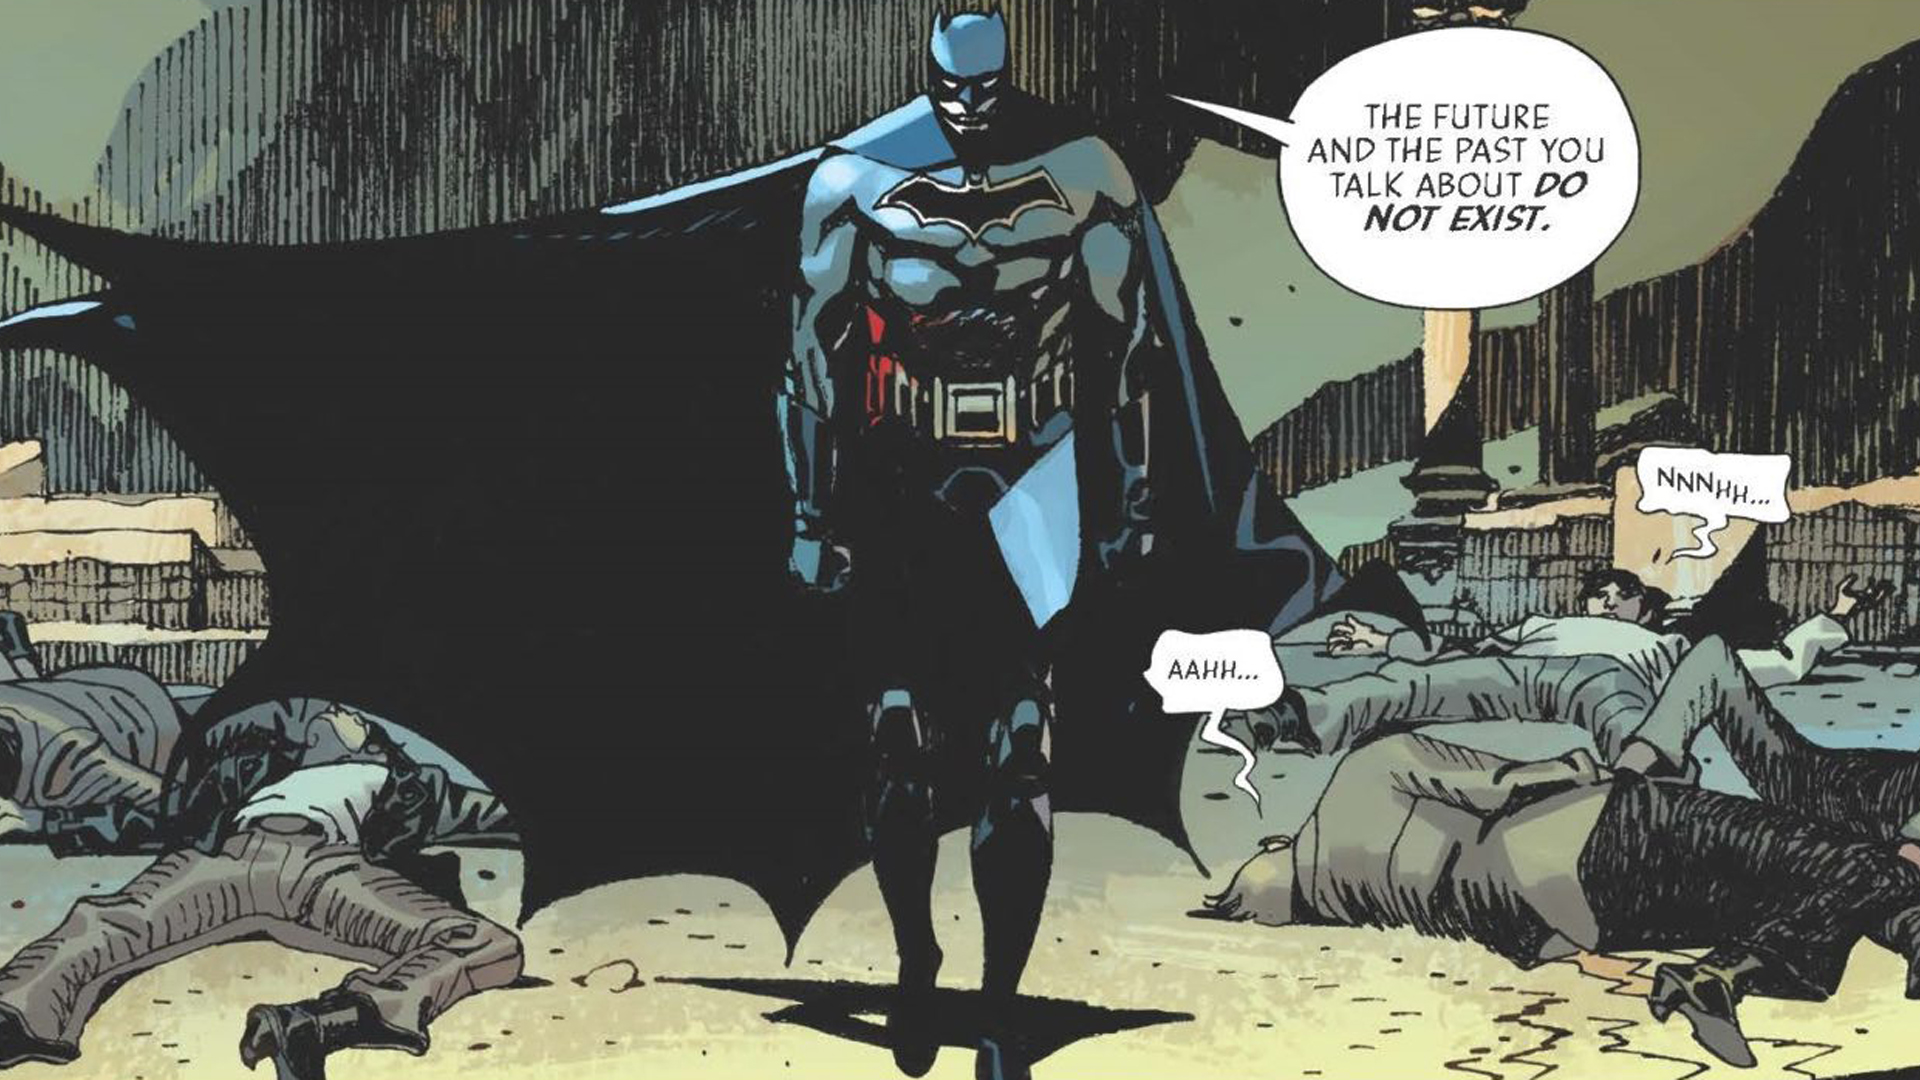 Batman Day comics will be limited as DC supply chain issues continue |  GamesRadar+